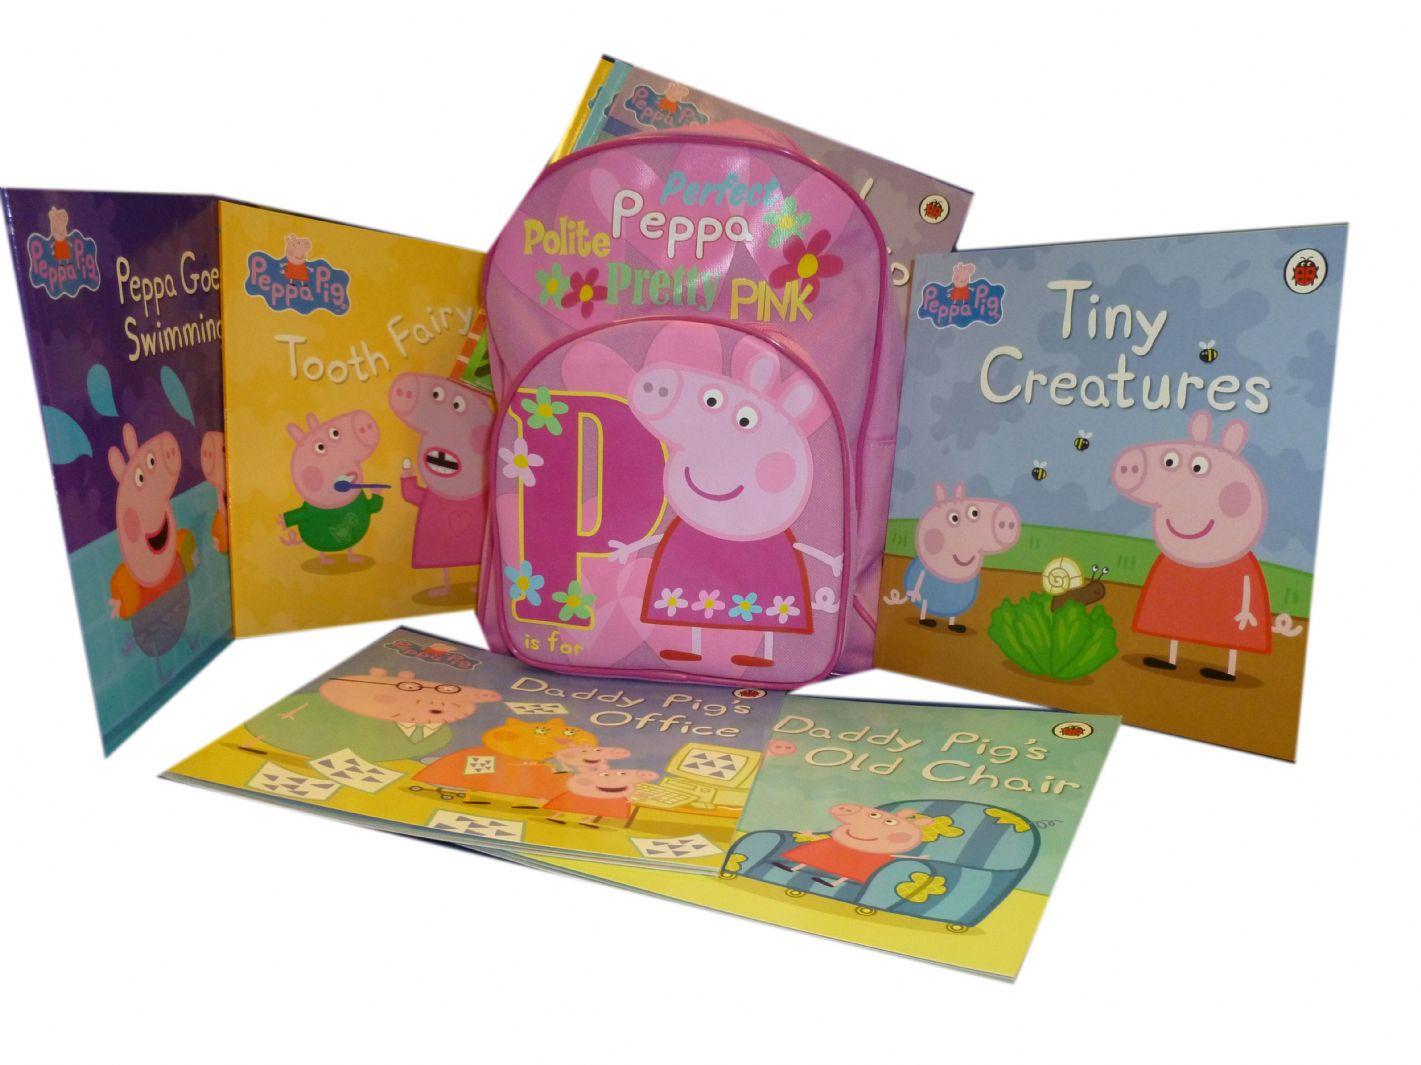 Foto Peppa Pig Collection Books Set With Backpack